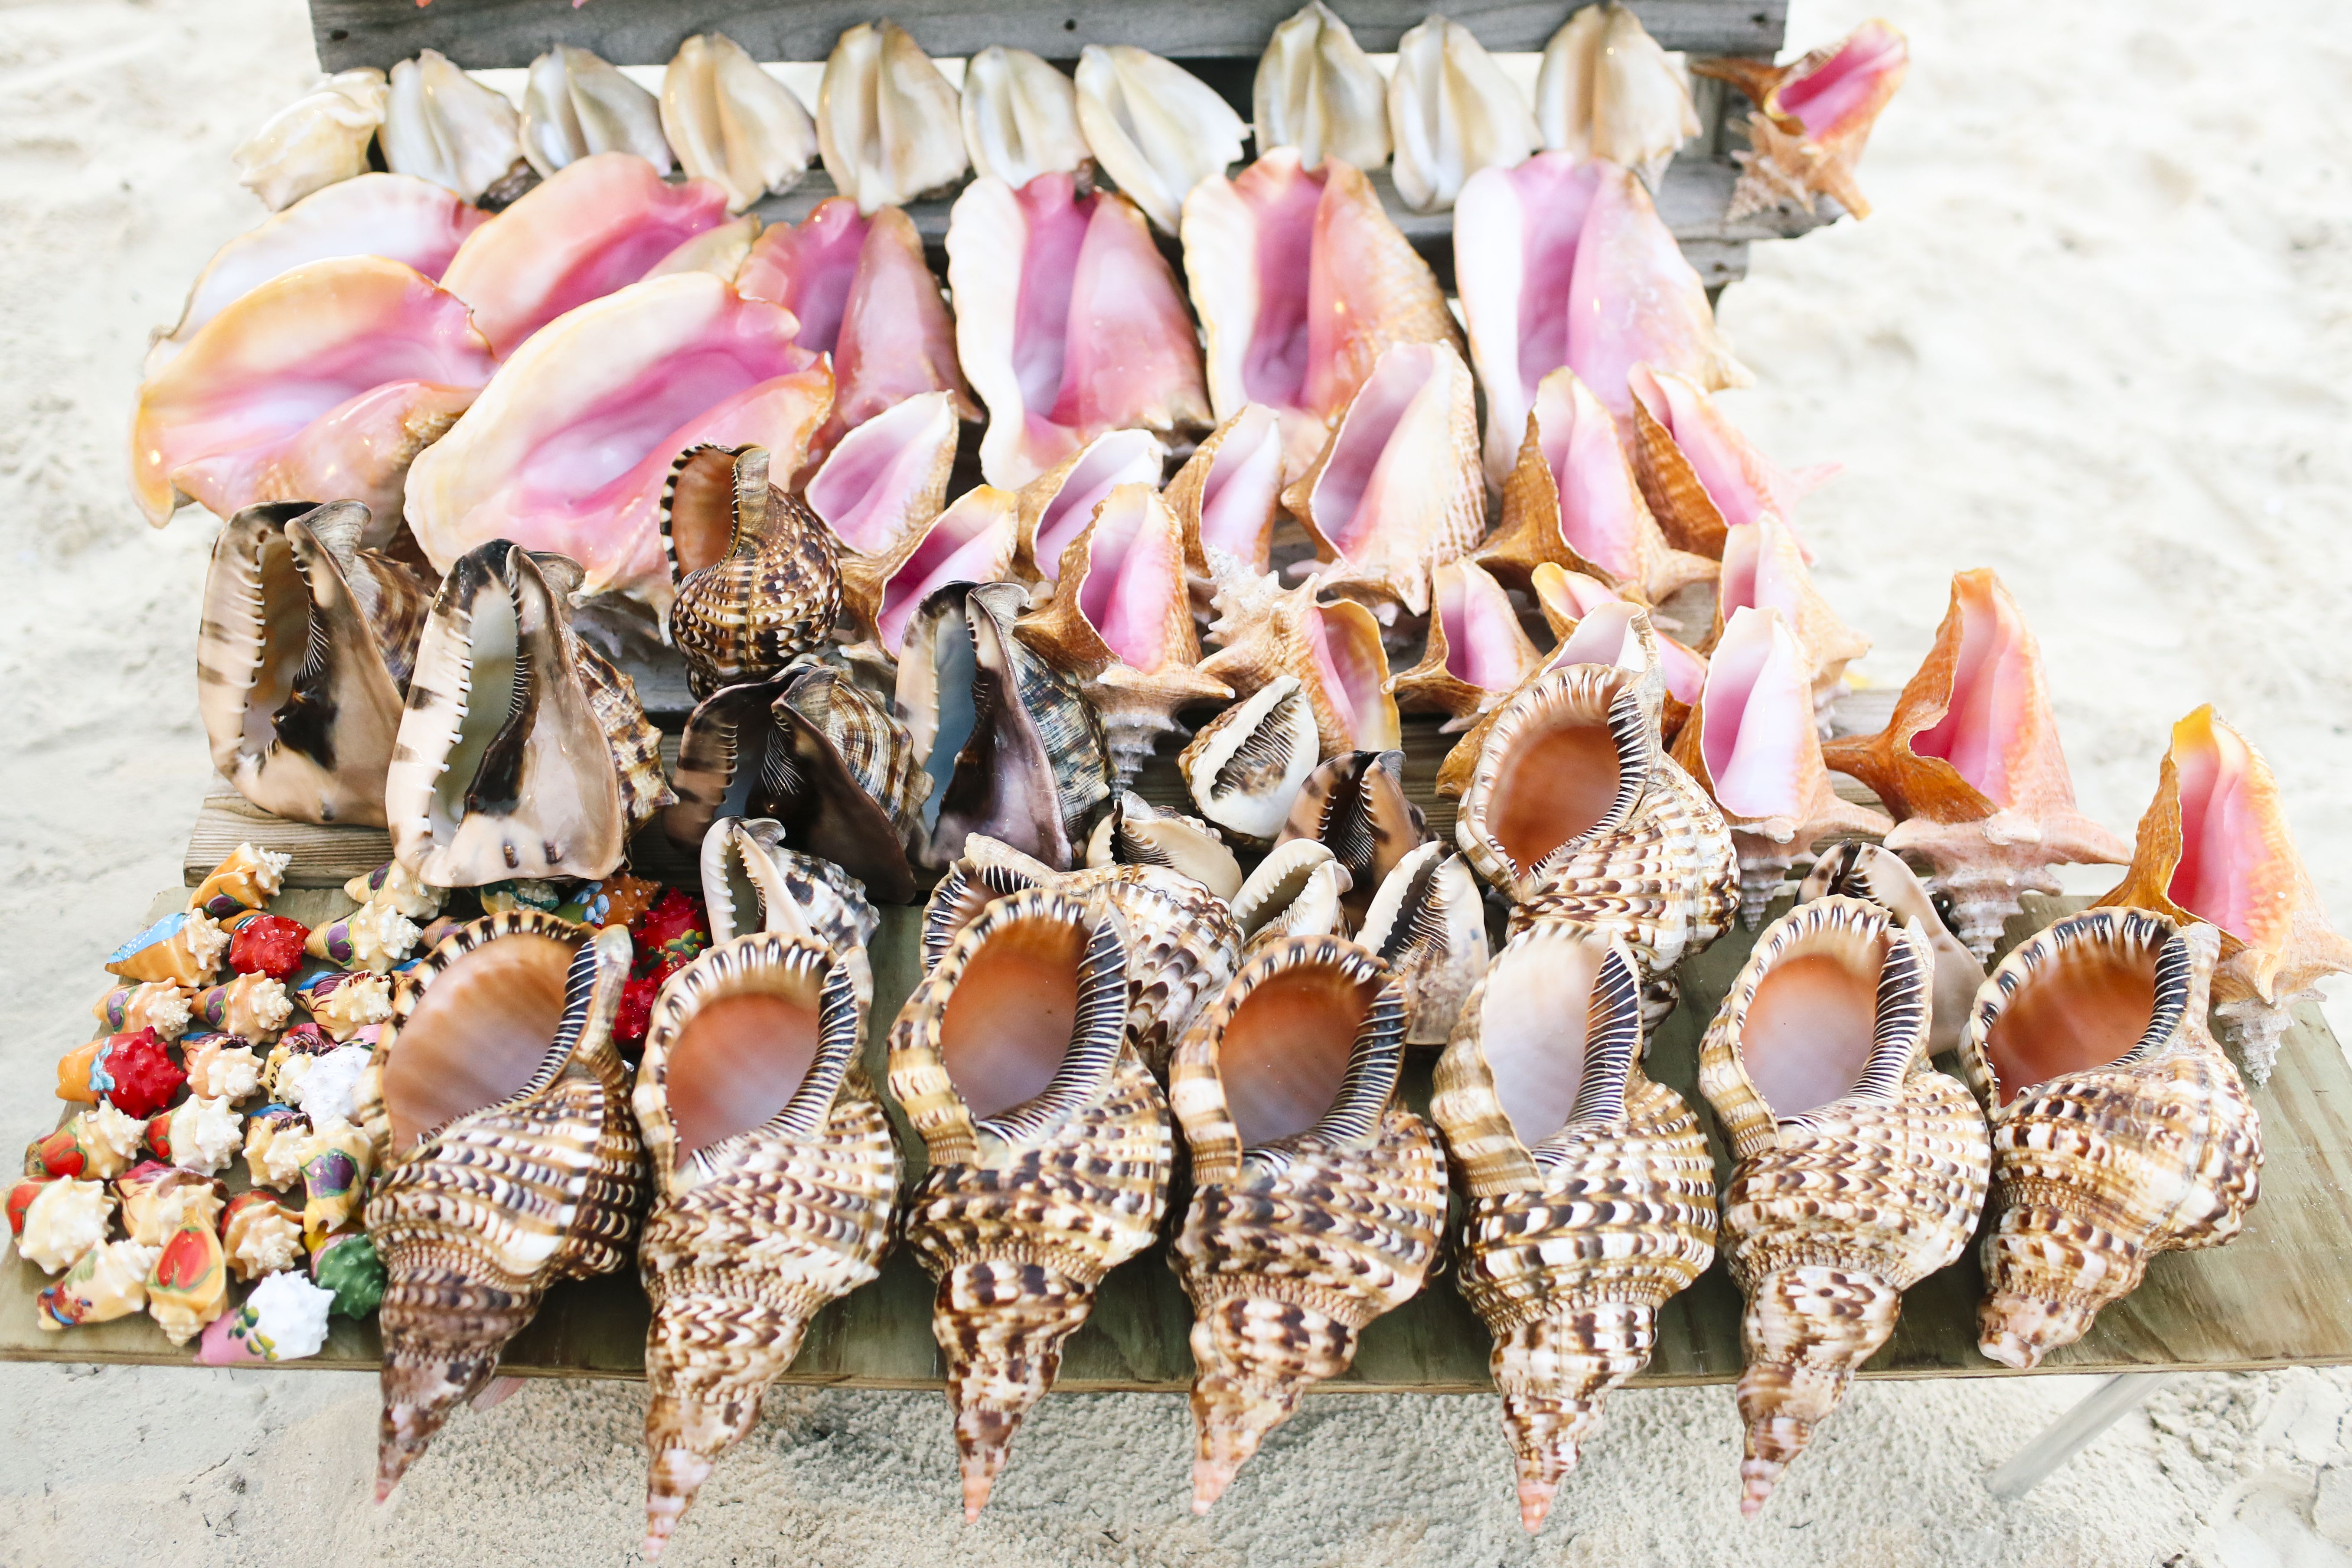 Conch Shells in Providenciales